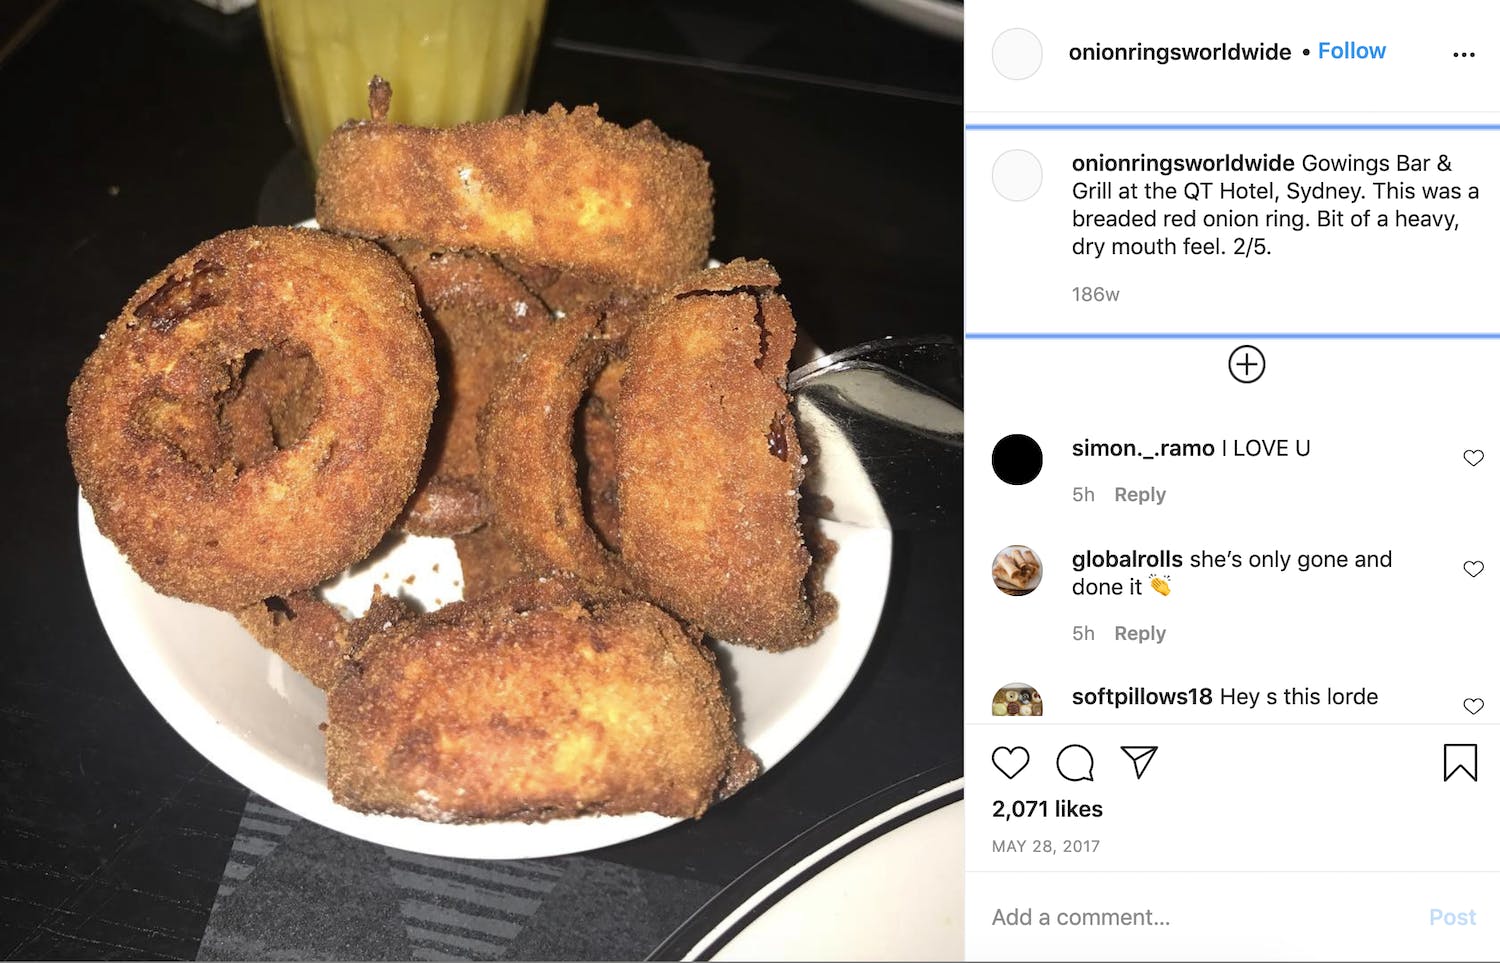 A photograph of thick reddish-brown breaded onion rings with the caption 'Gowings Bar & Grill at the QT Hotel, Sydney. This was a breaded red onion ring. Bit of a heavy, dry mouth feel. 2/5. 186w'